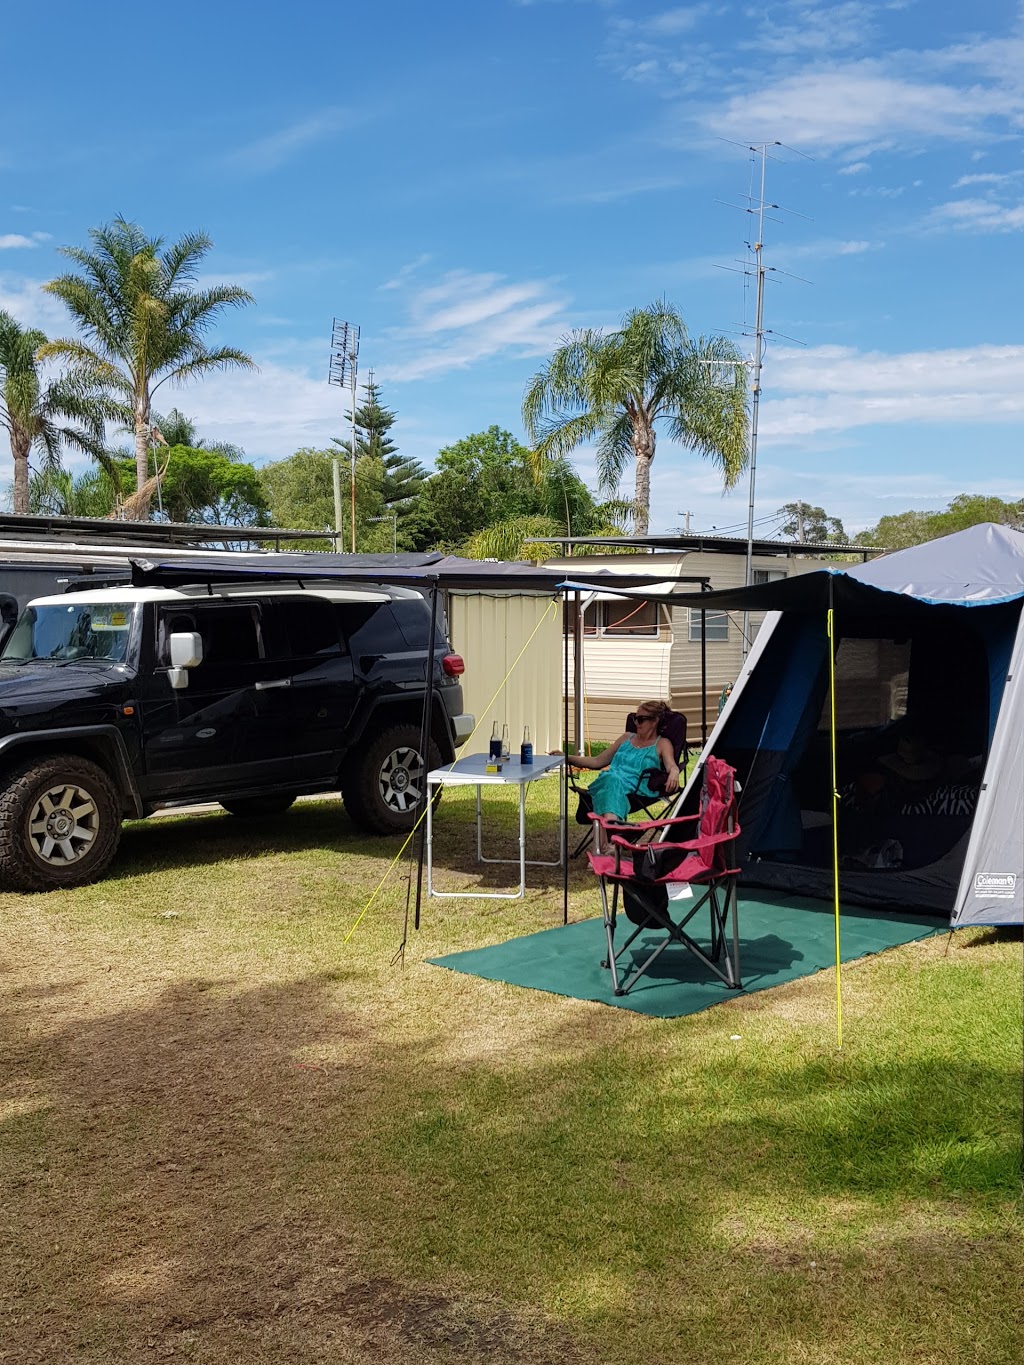 Coastal Palms Holiday Park | campground | 40 Shoalhaven Heads Rd, Shoalhaven Heads NSW 2535, Australia | 0244487206 OR +61 2 4448 7206